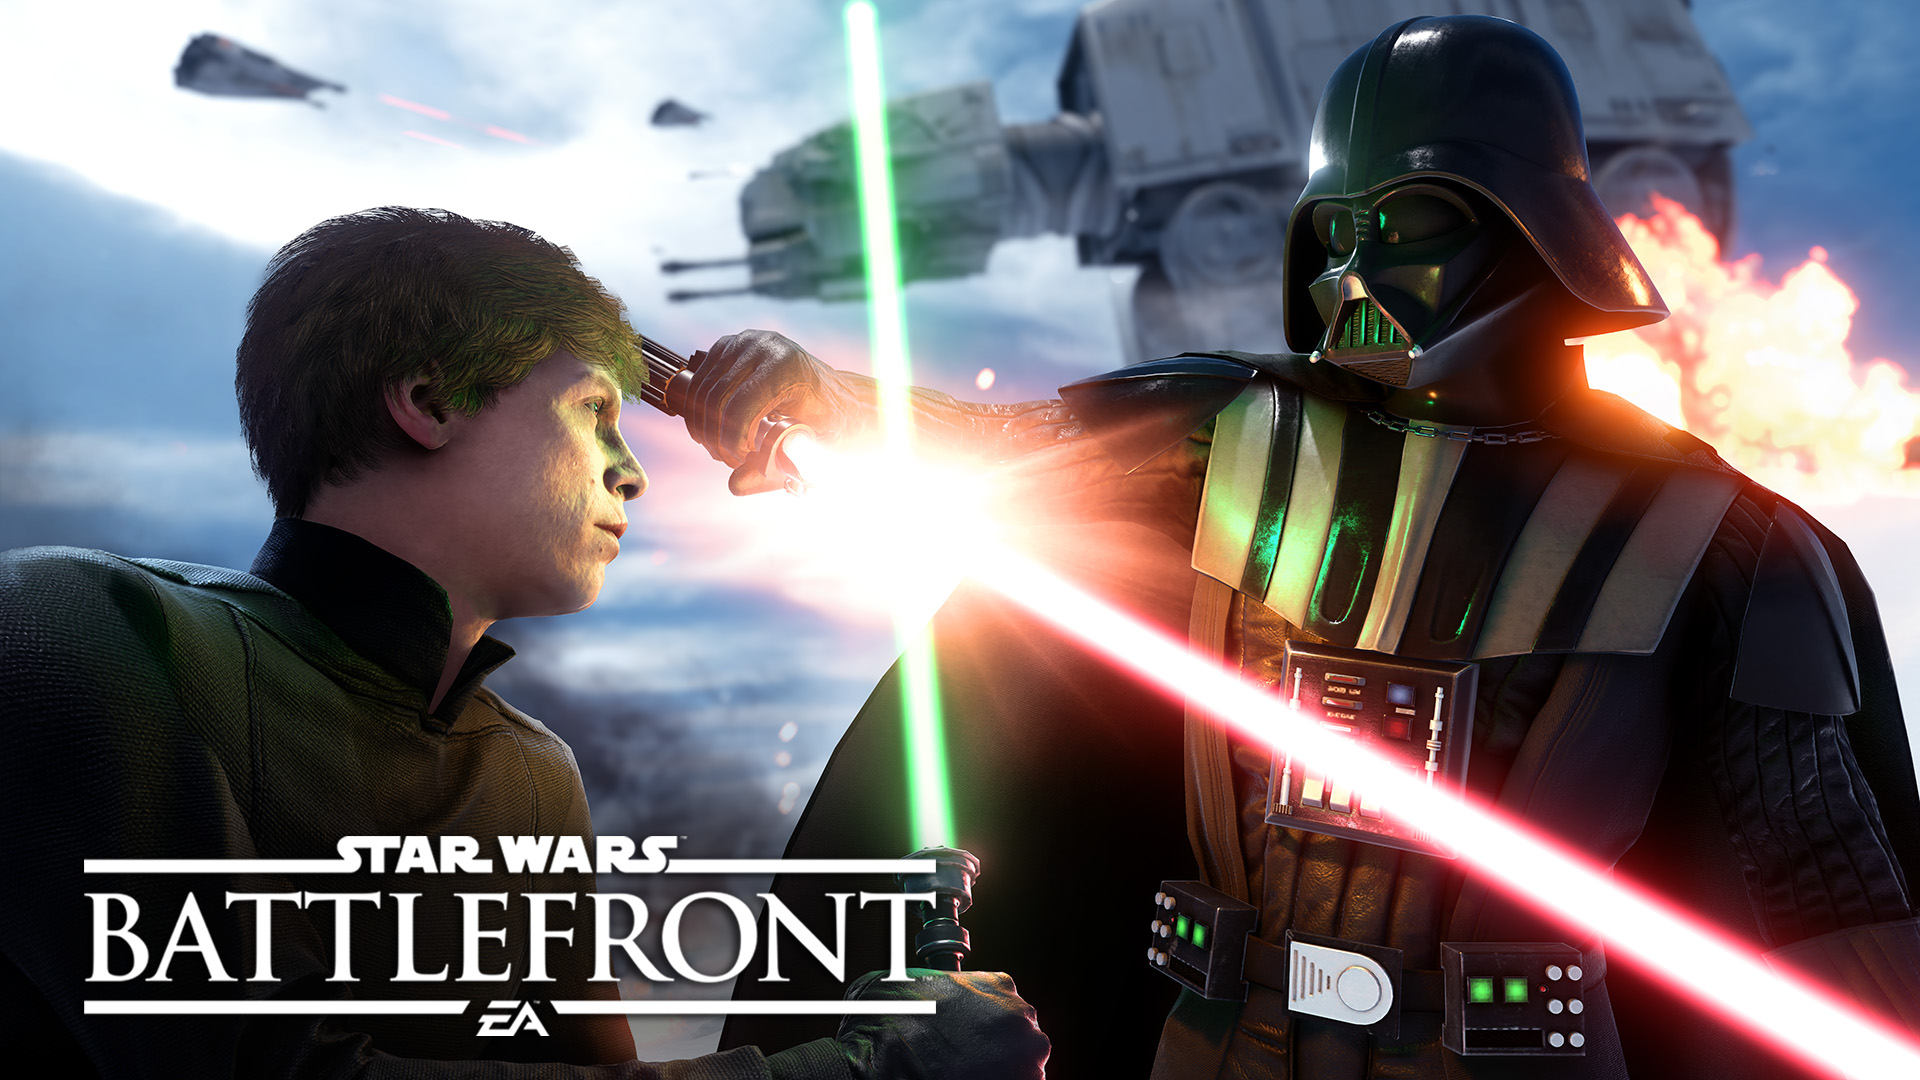 Star Wars Battlefront Review for Xbox One